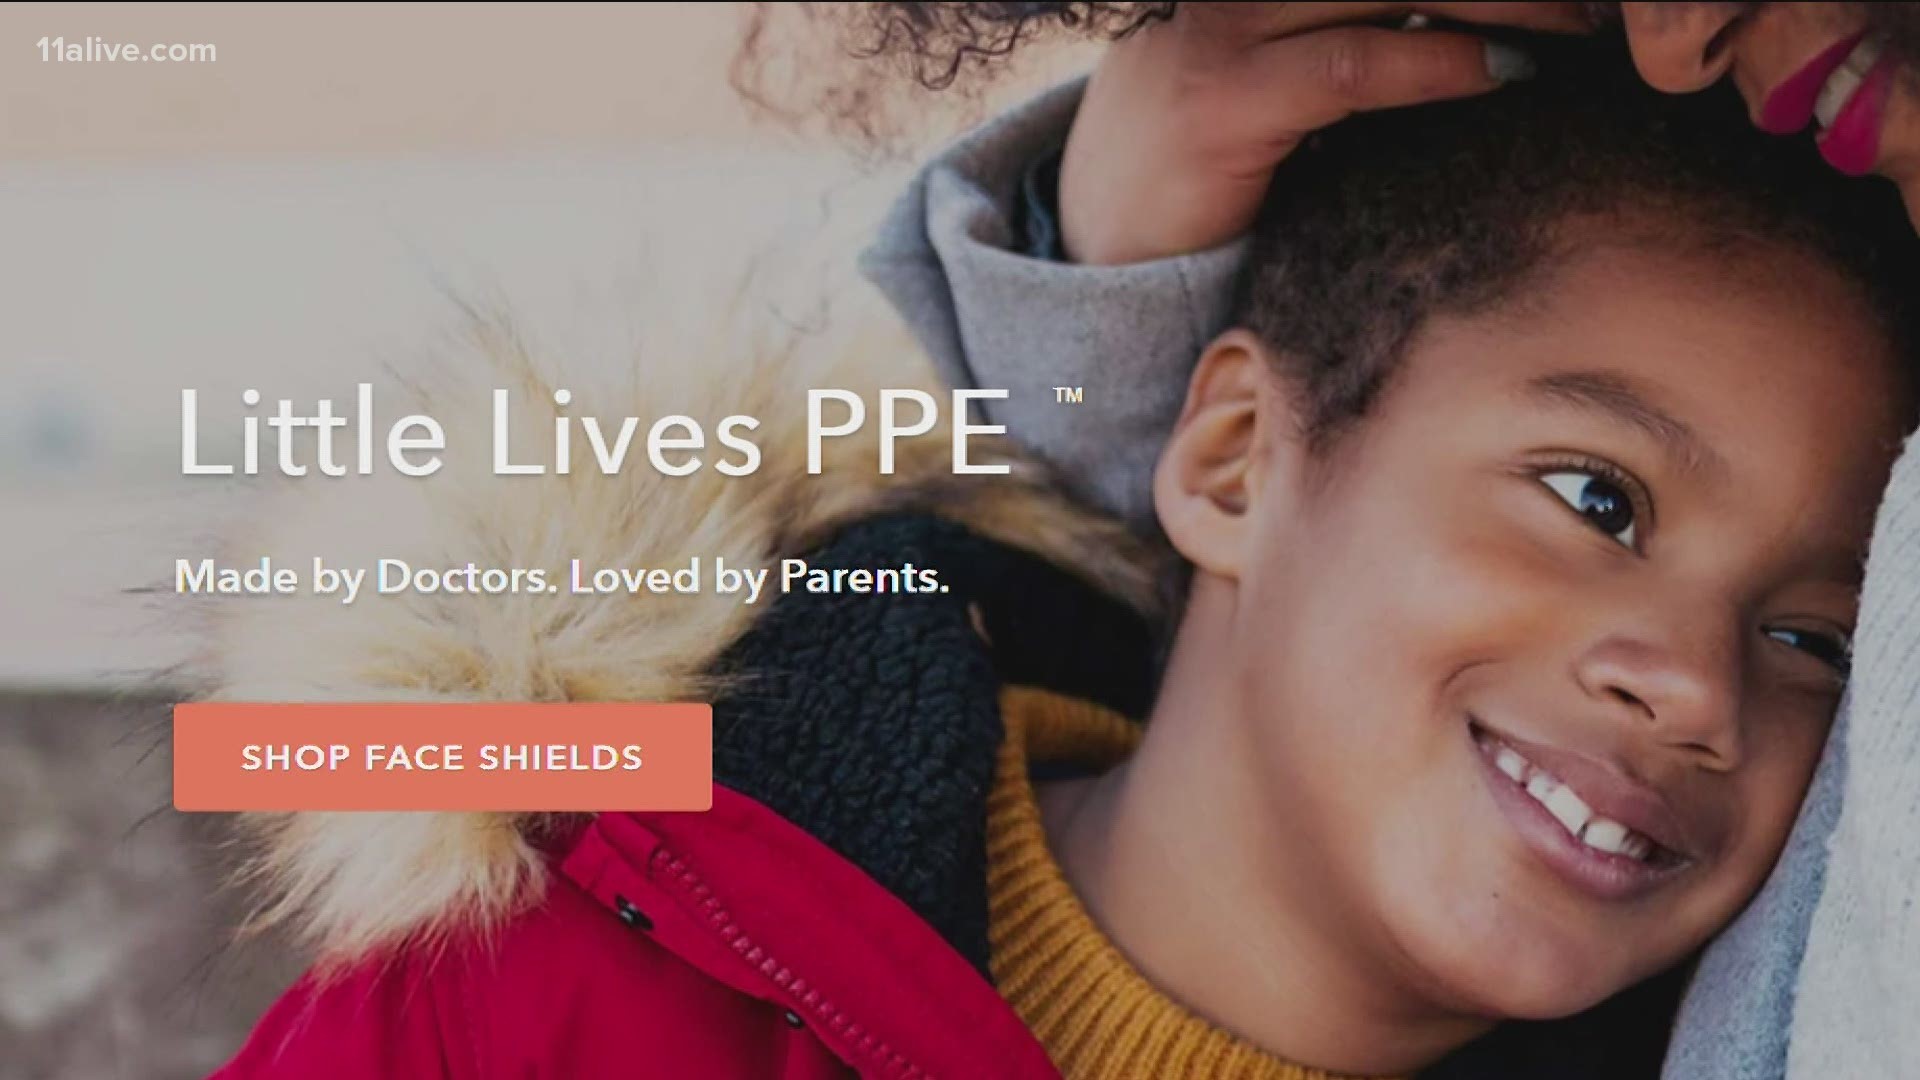 Little Lives PPE partners with Atlanta Children's Shelter to help all children get PPE.